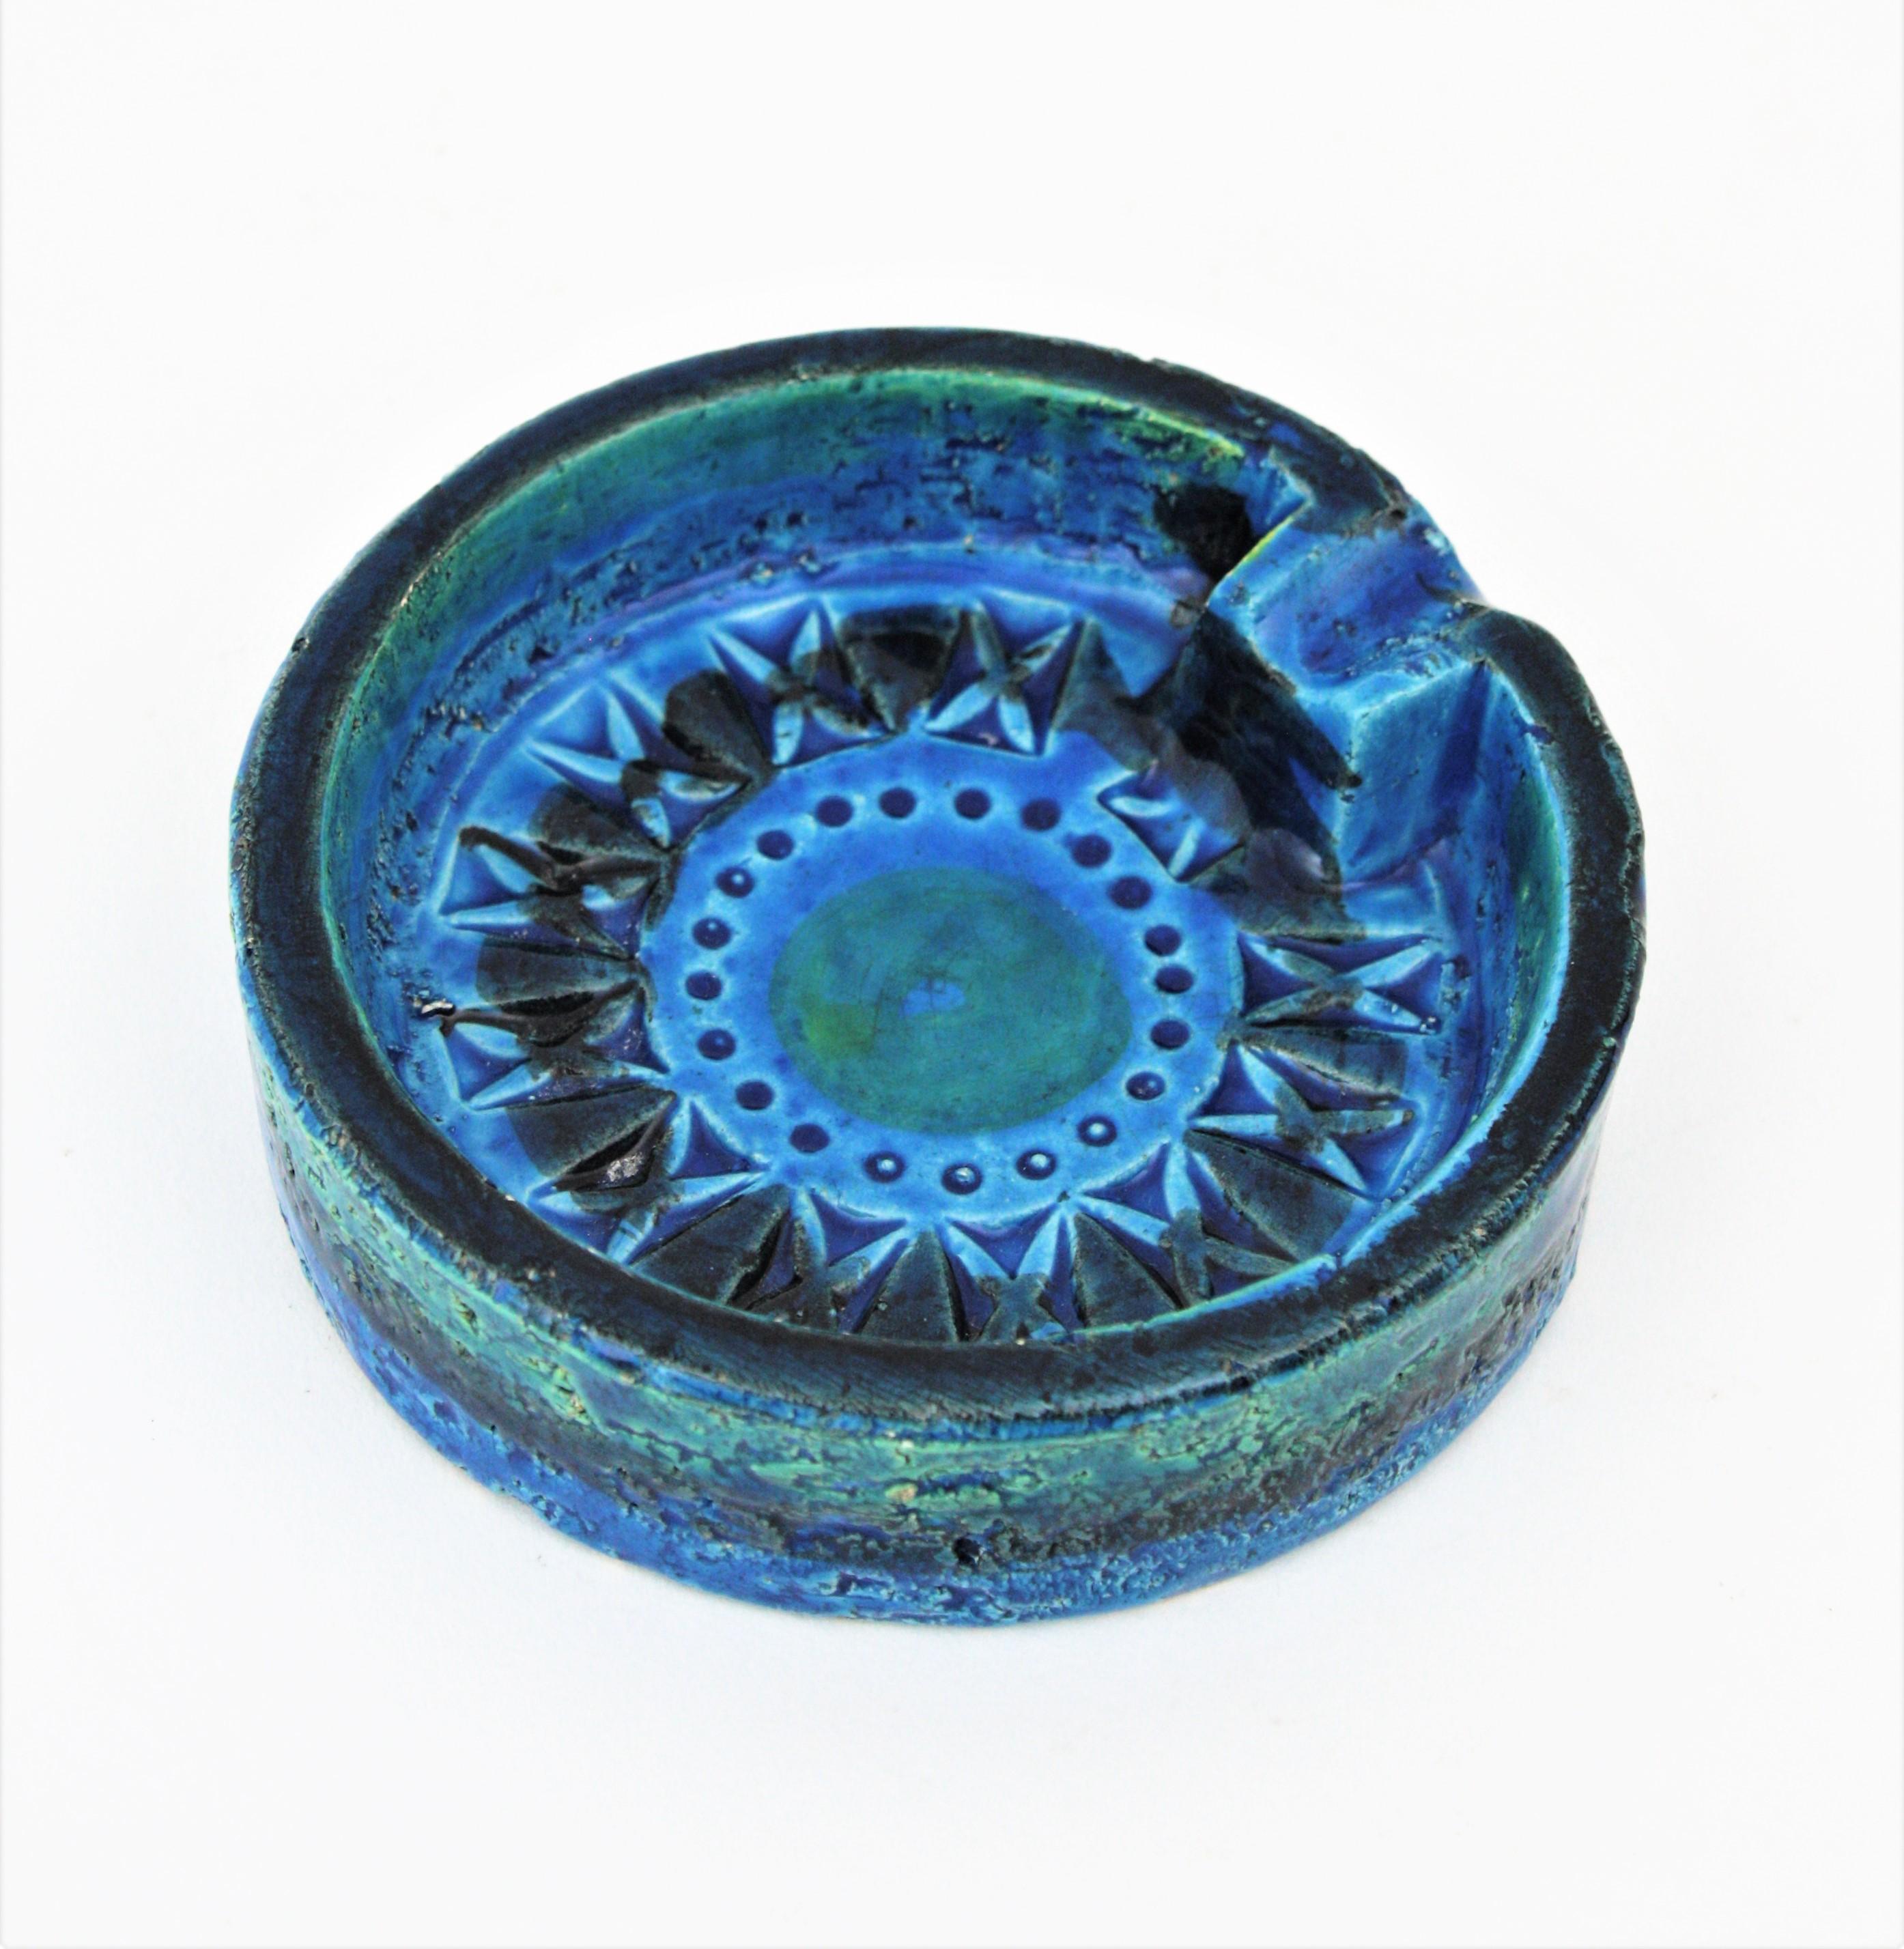 Beautiful blue glazed (Rimini blue) circular ceramic ashtray design by Aldo Londi and manufactured by Bitossi. Italy, 1950s-1960s.
Handcrafted in Italy with hand carved geometric design in glazed vibrant turquoise and cobalt blue. Marked Italy